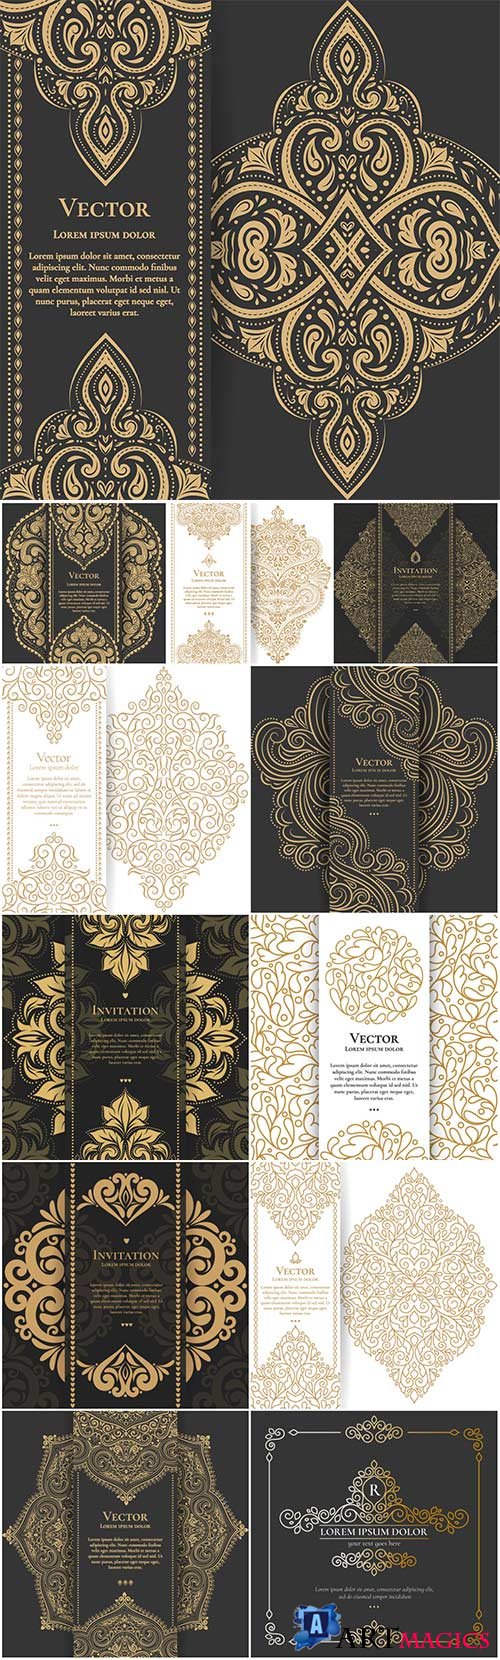 Vector vintage backgrounds with gold patterns